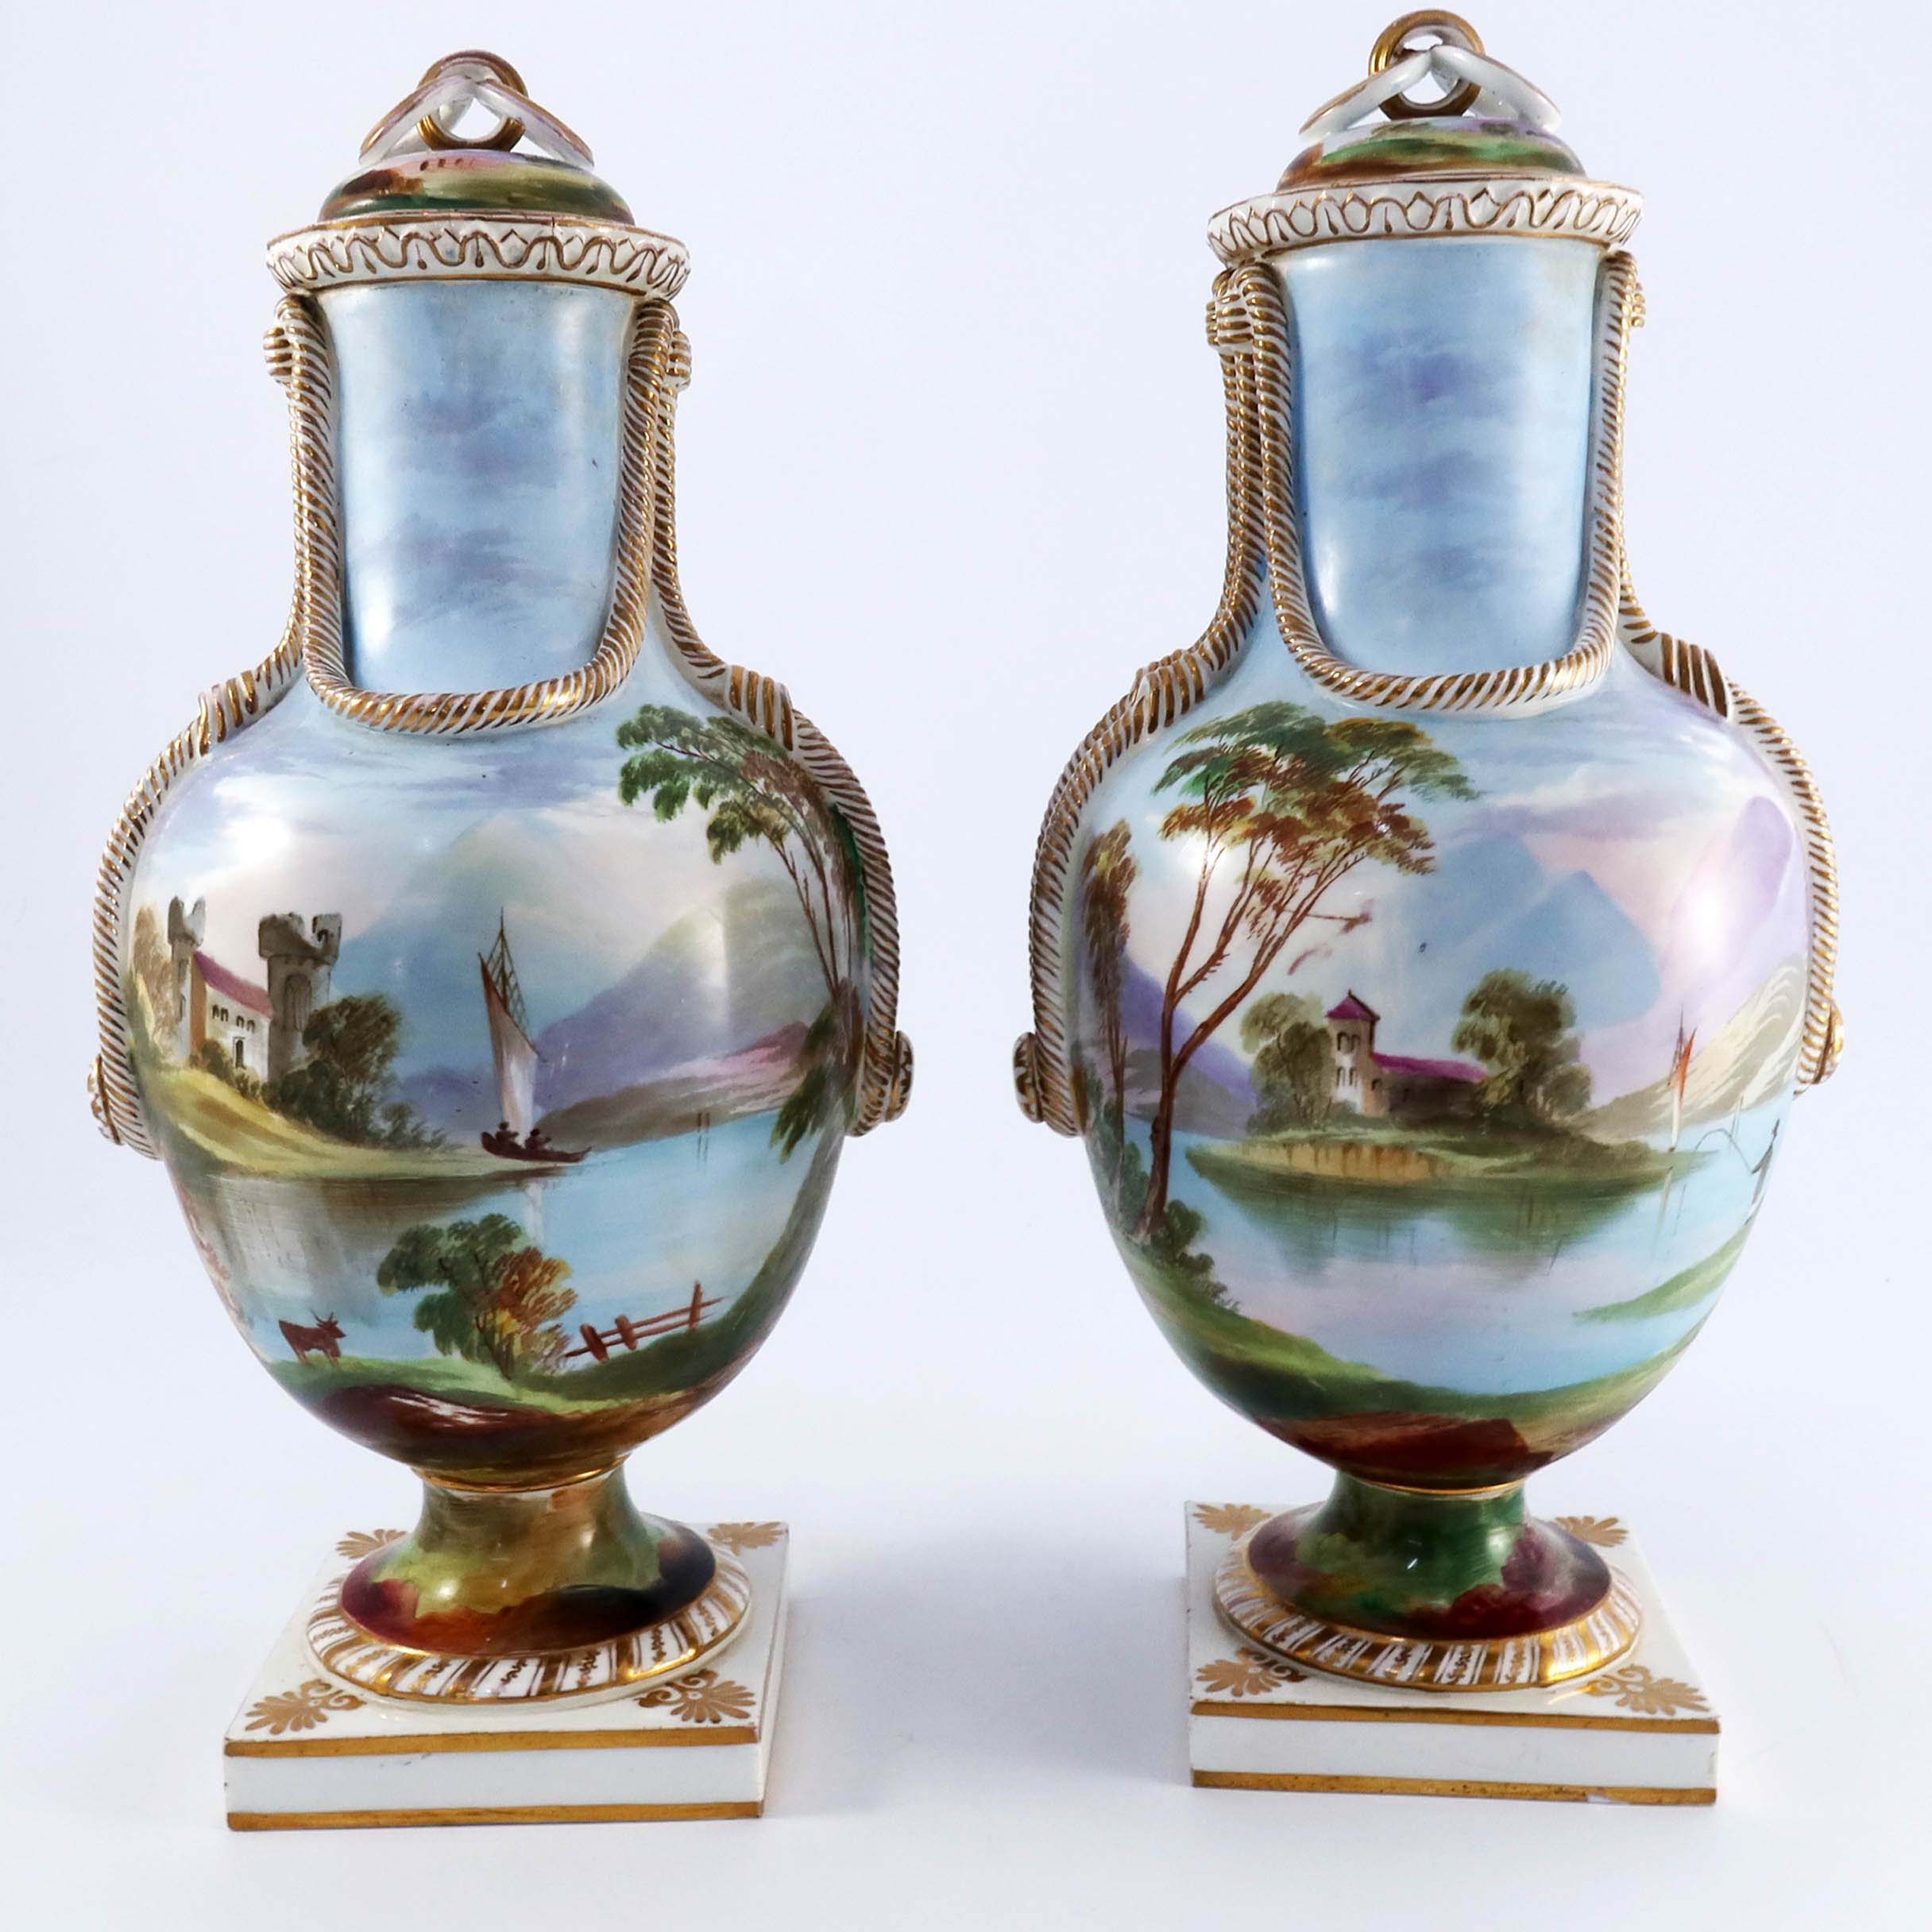 A pair of mid 19th century Sevres shape possibly Minton 'rope festoon' classical vases - Image 2 of 6